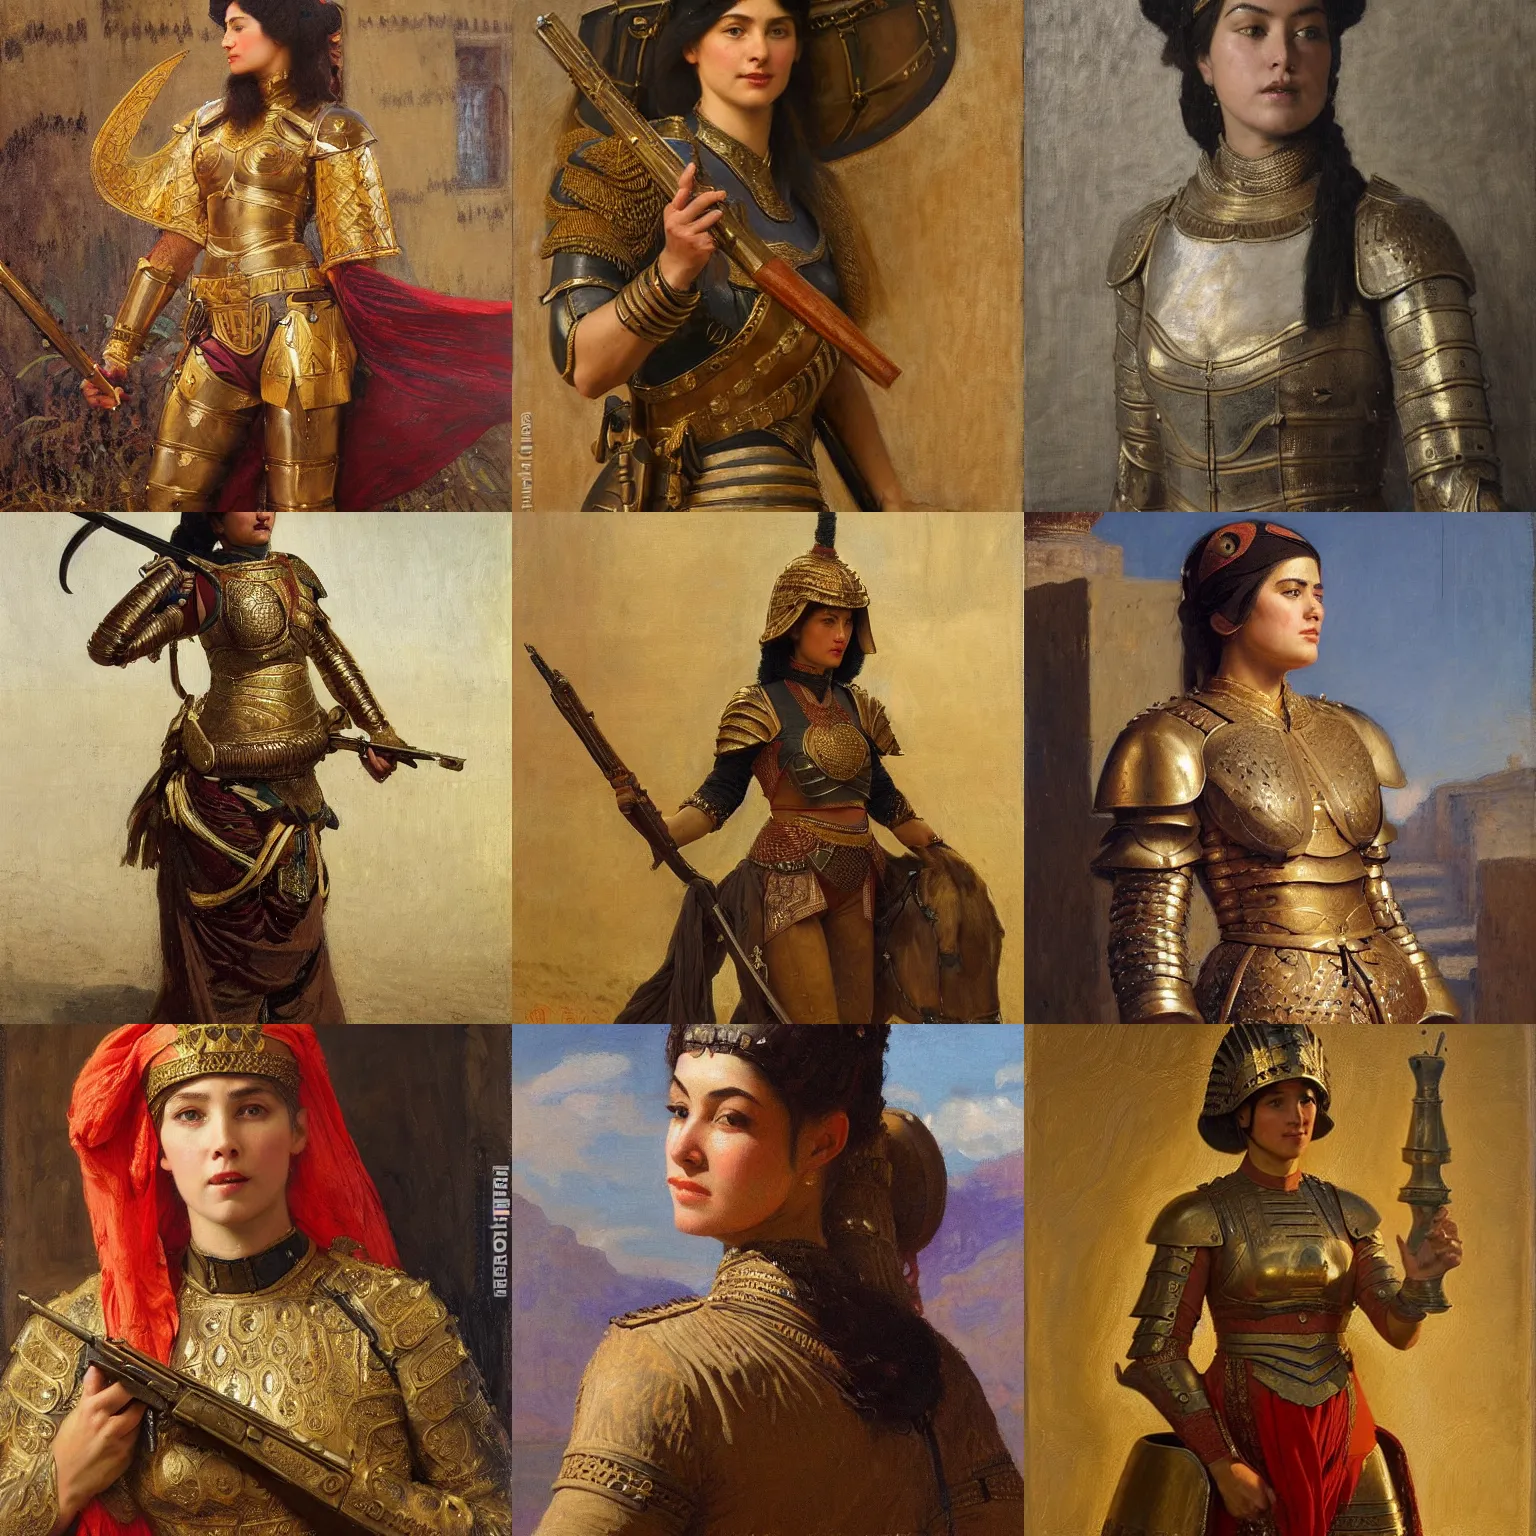 Prompt: orientalism female soldier wearing heavy armor by edwin longsden long and theodore ralli and nasreddine dinet and adam styka, masterful intricate artwork. oil on canvas, excellent lighting, high detail 8 k